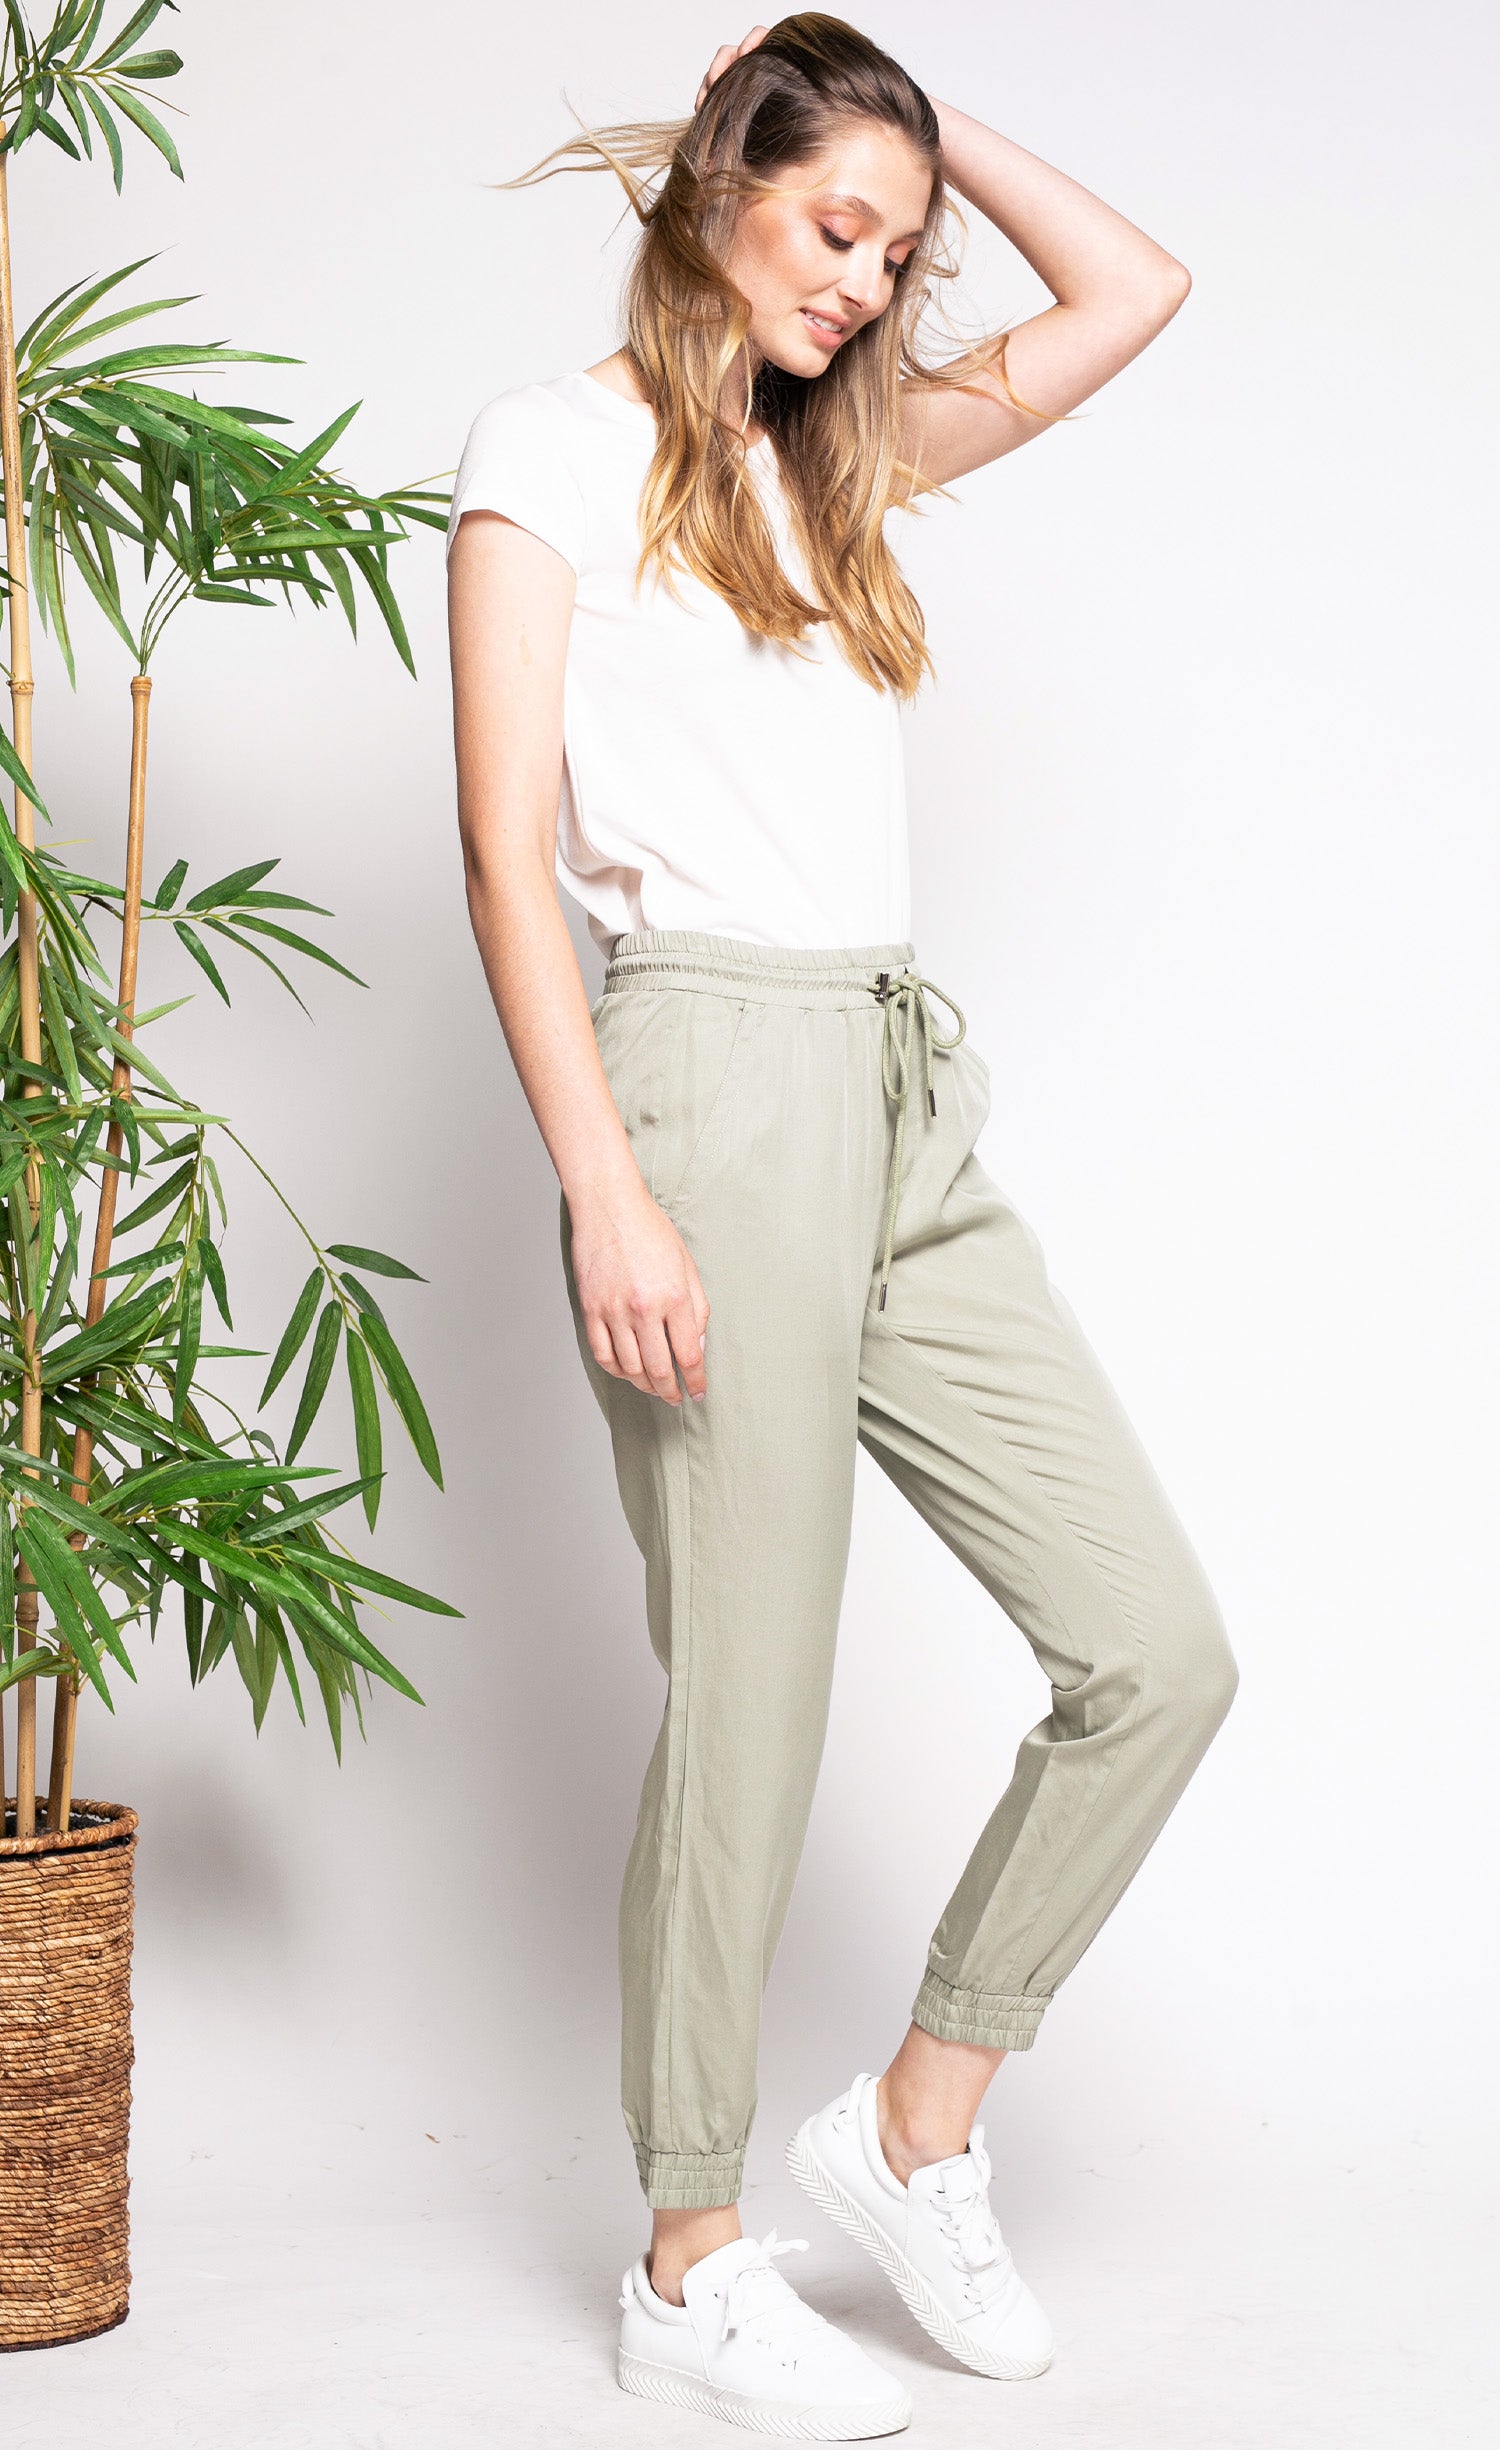 The Allegra Pants - Pink Martini Collection